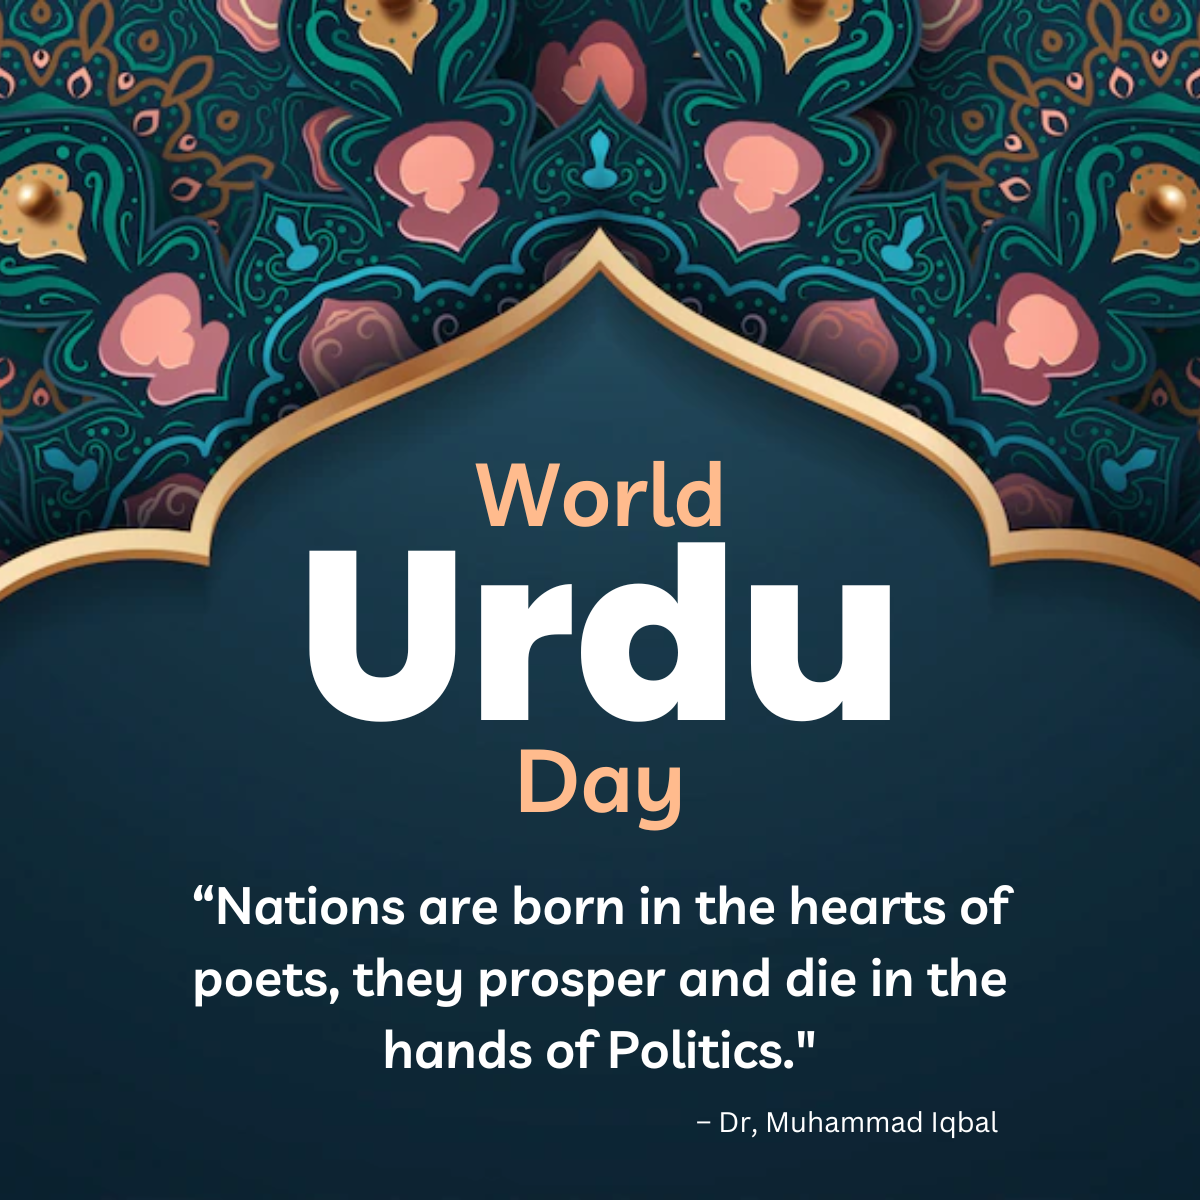 World Urdu Day 2022: Quotes, Slogans, Images, Posters, Shayari, and Messages to honour one of the most important languages spoken in the Indian subcontinent